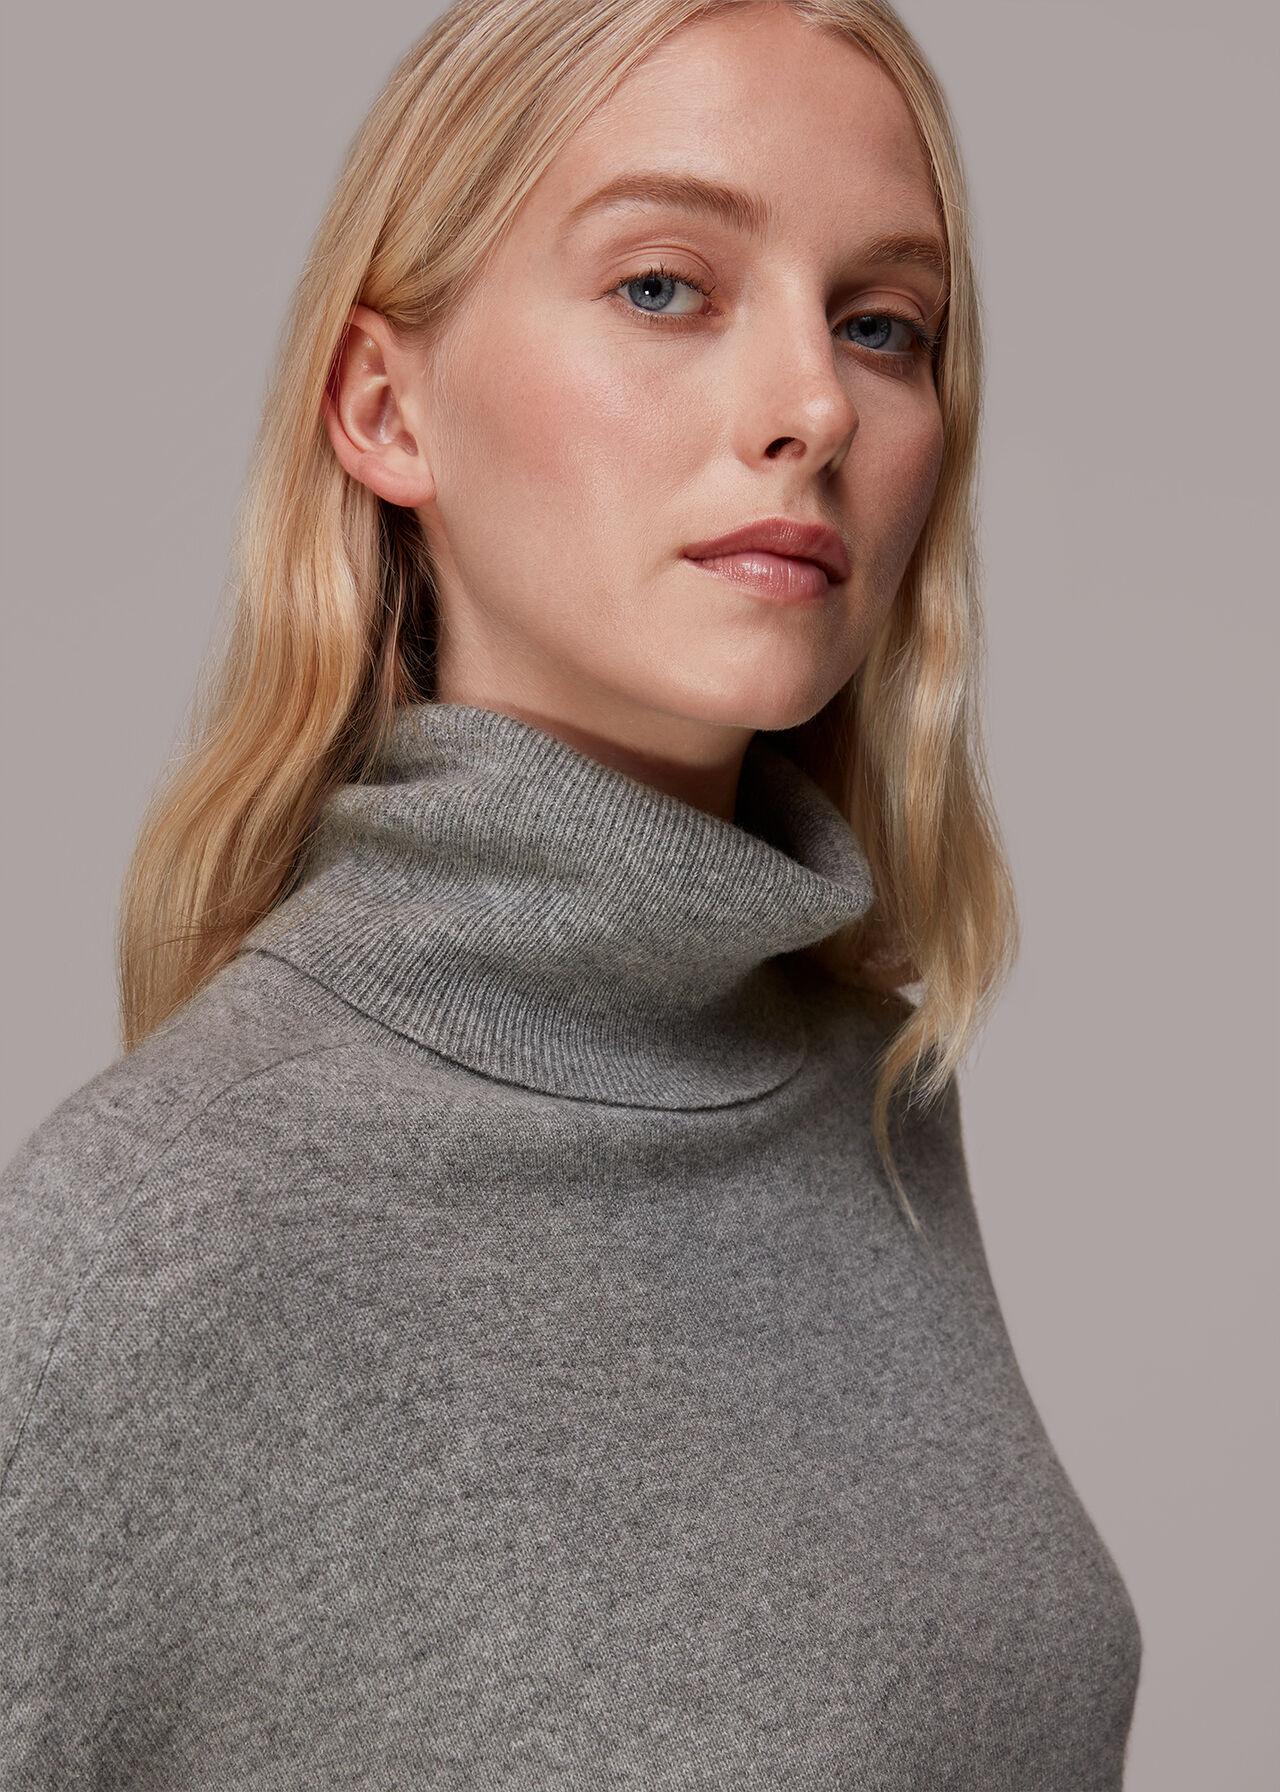 Shop the Grey Cashmere Roll Neck Jumper at Whistles